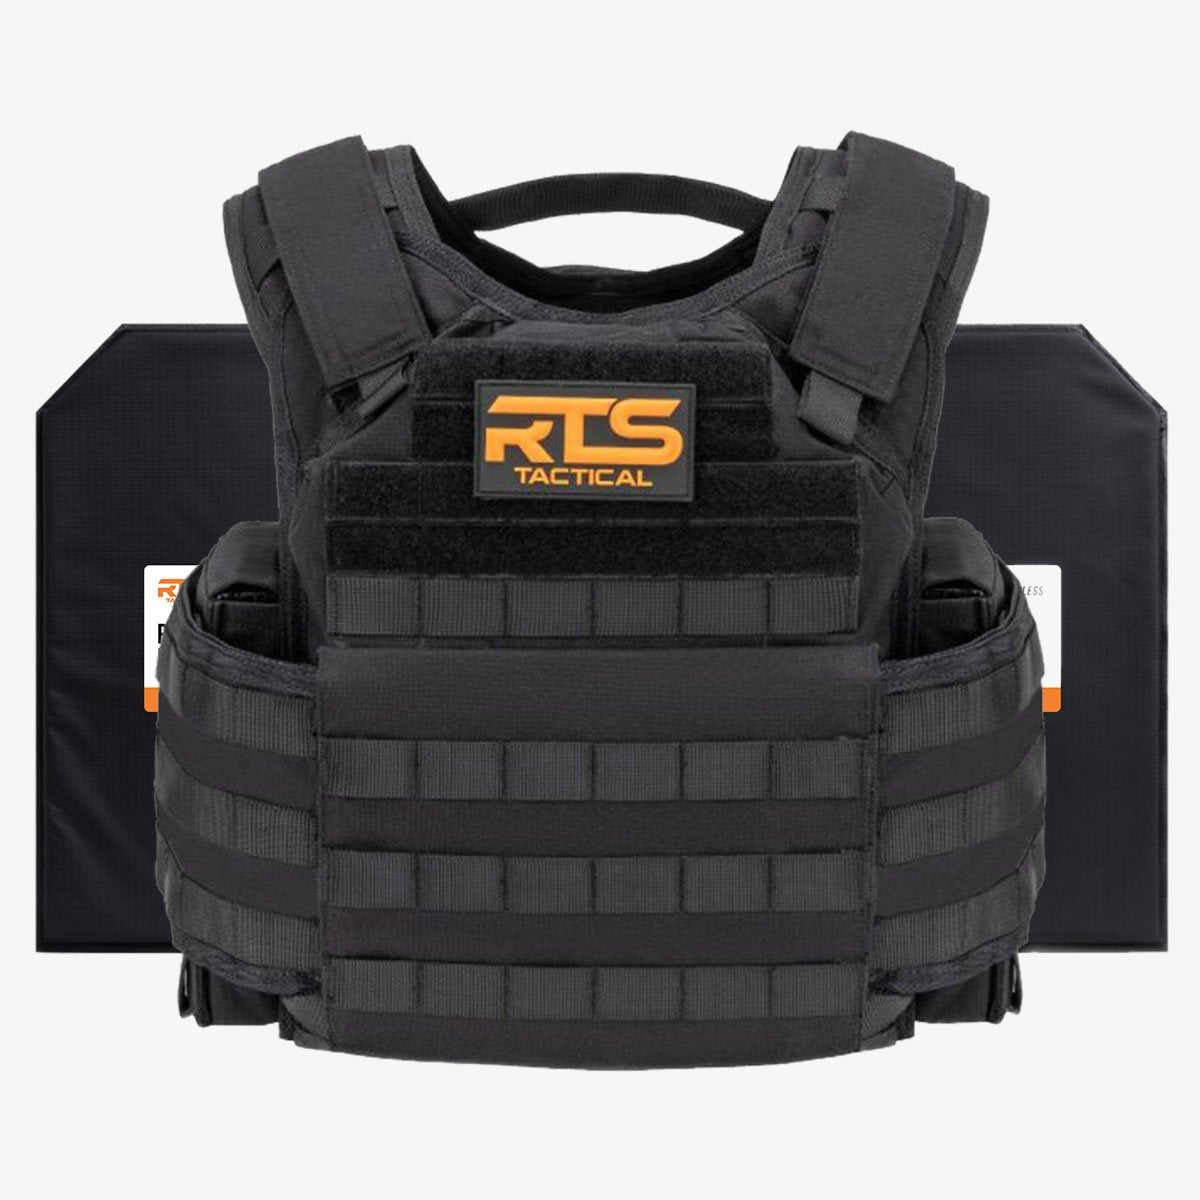 RTS Tactical Level IIIA FX770 Soft Armor Active Shooter Kit